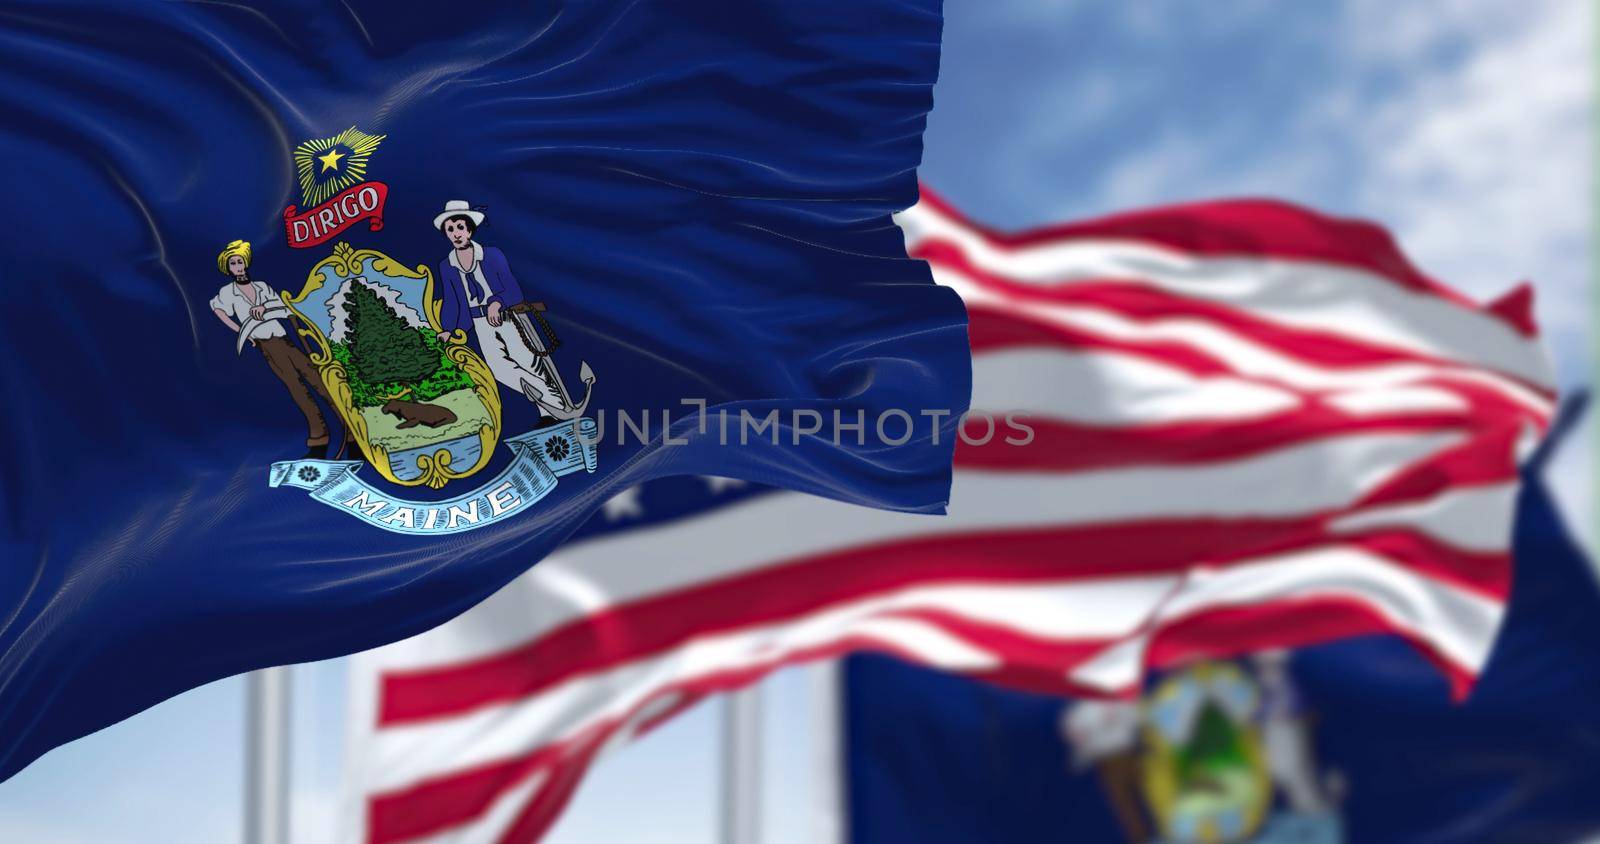 The Maine state flag waving along with the national flag of the United States of America. In the background there is a clear sky. Maine is a state in the New England region of the United States